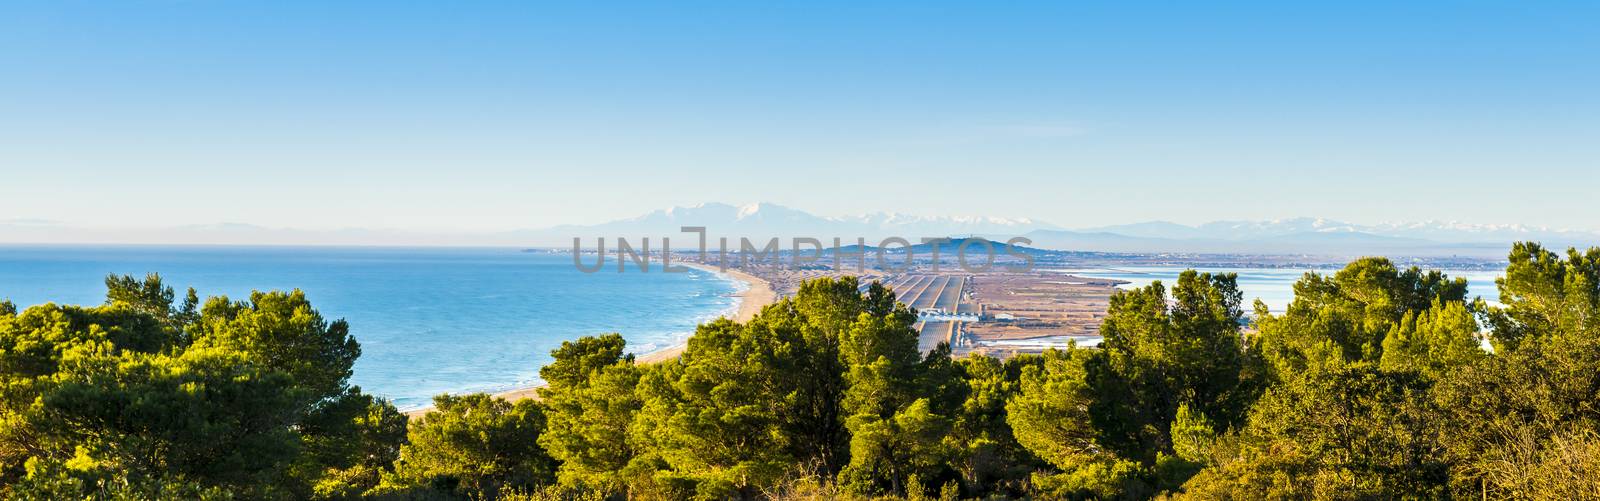 Panoramic from the Pierres Blanches, district of Sète where it is possible to have a magnificent view of Mont Saint-Loup Cap d`Agde in the background and on the Pyrenees with Mount Canigou in the background.